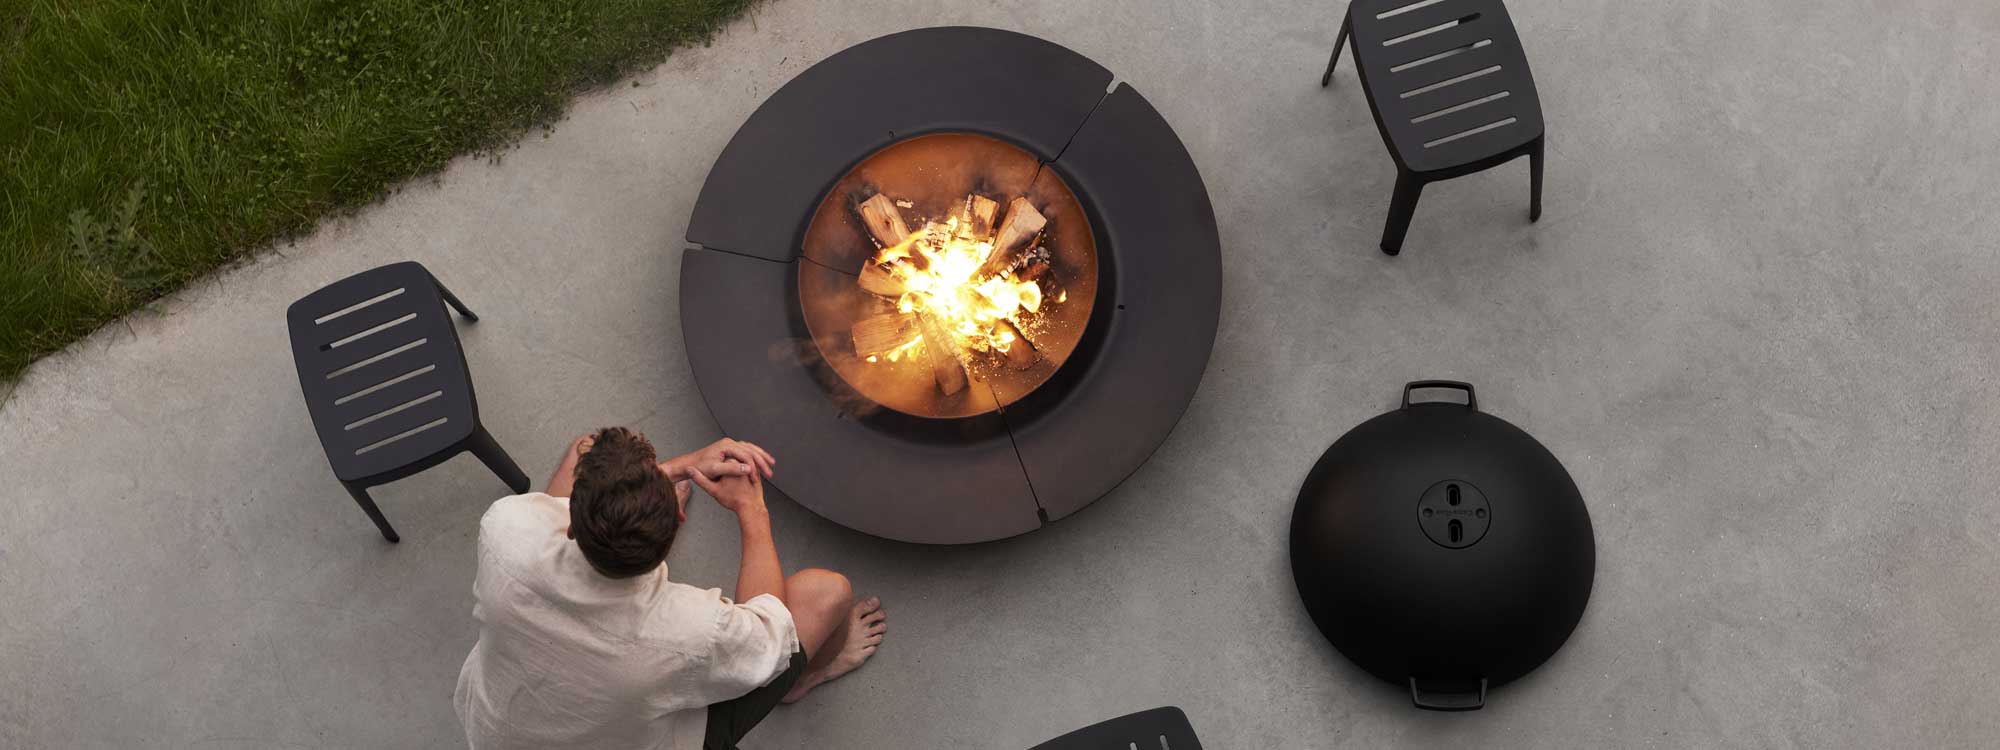 Image of an sat next to Cane-line Ember fire pit